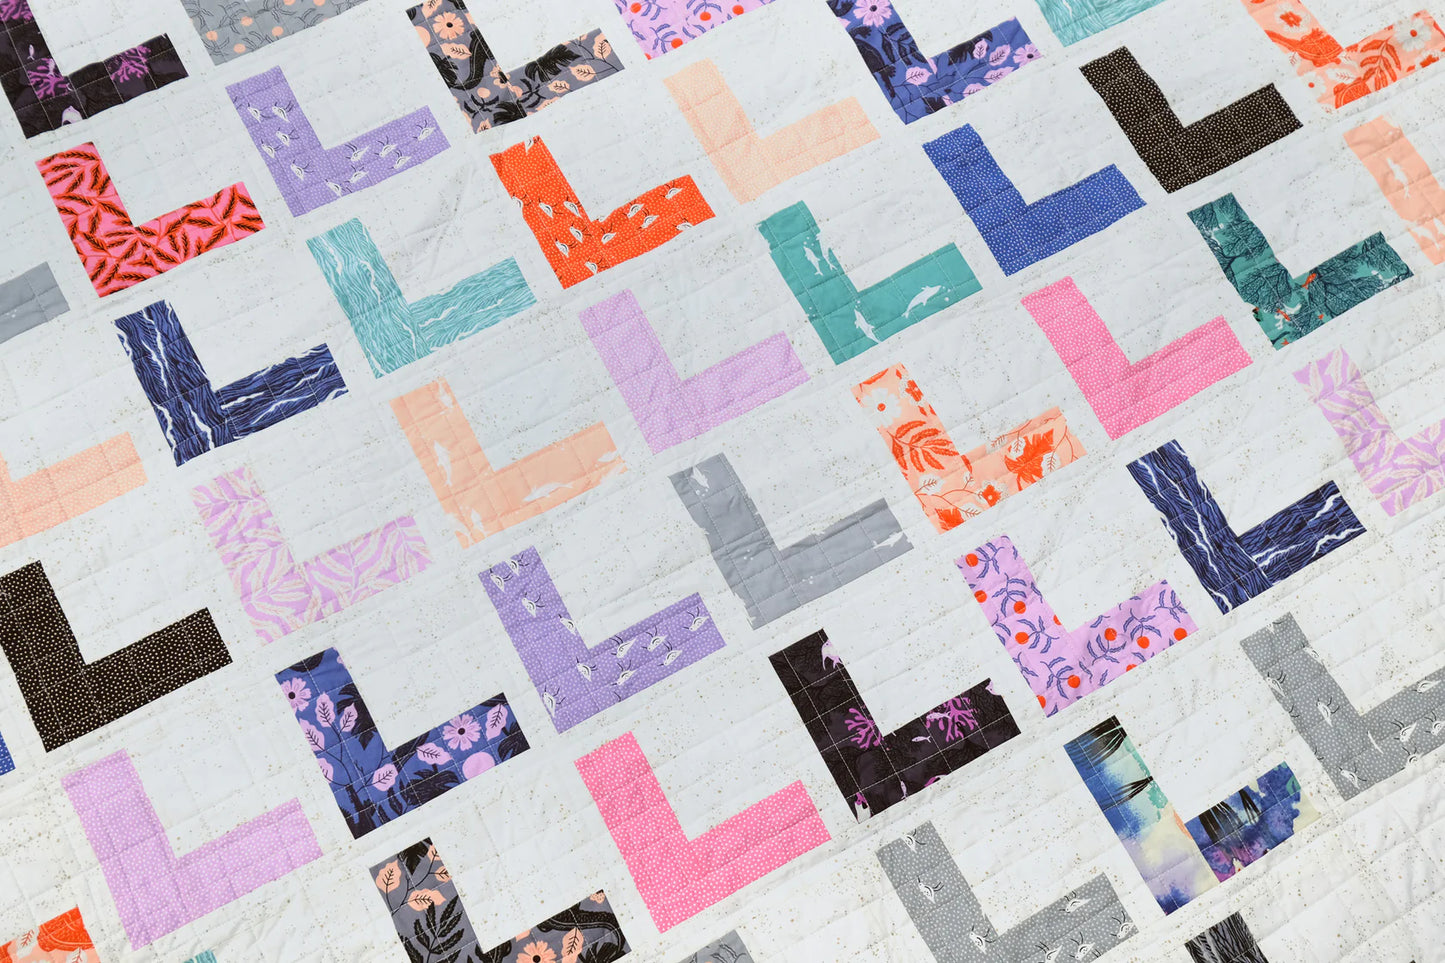 The Freya Quilt Pattern by Kitchen Table Quilting